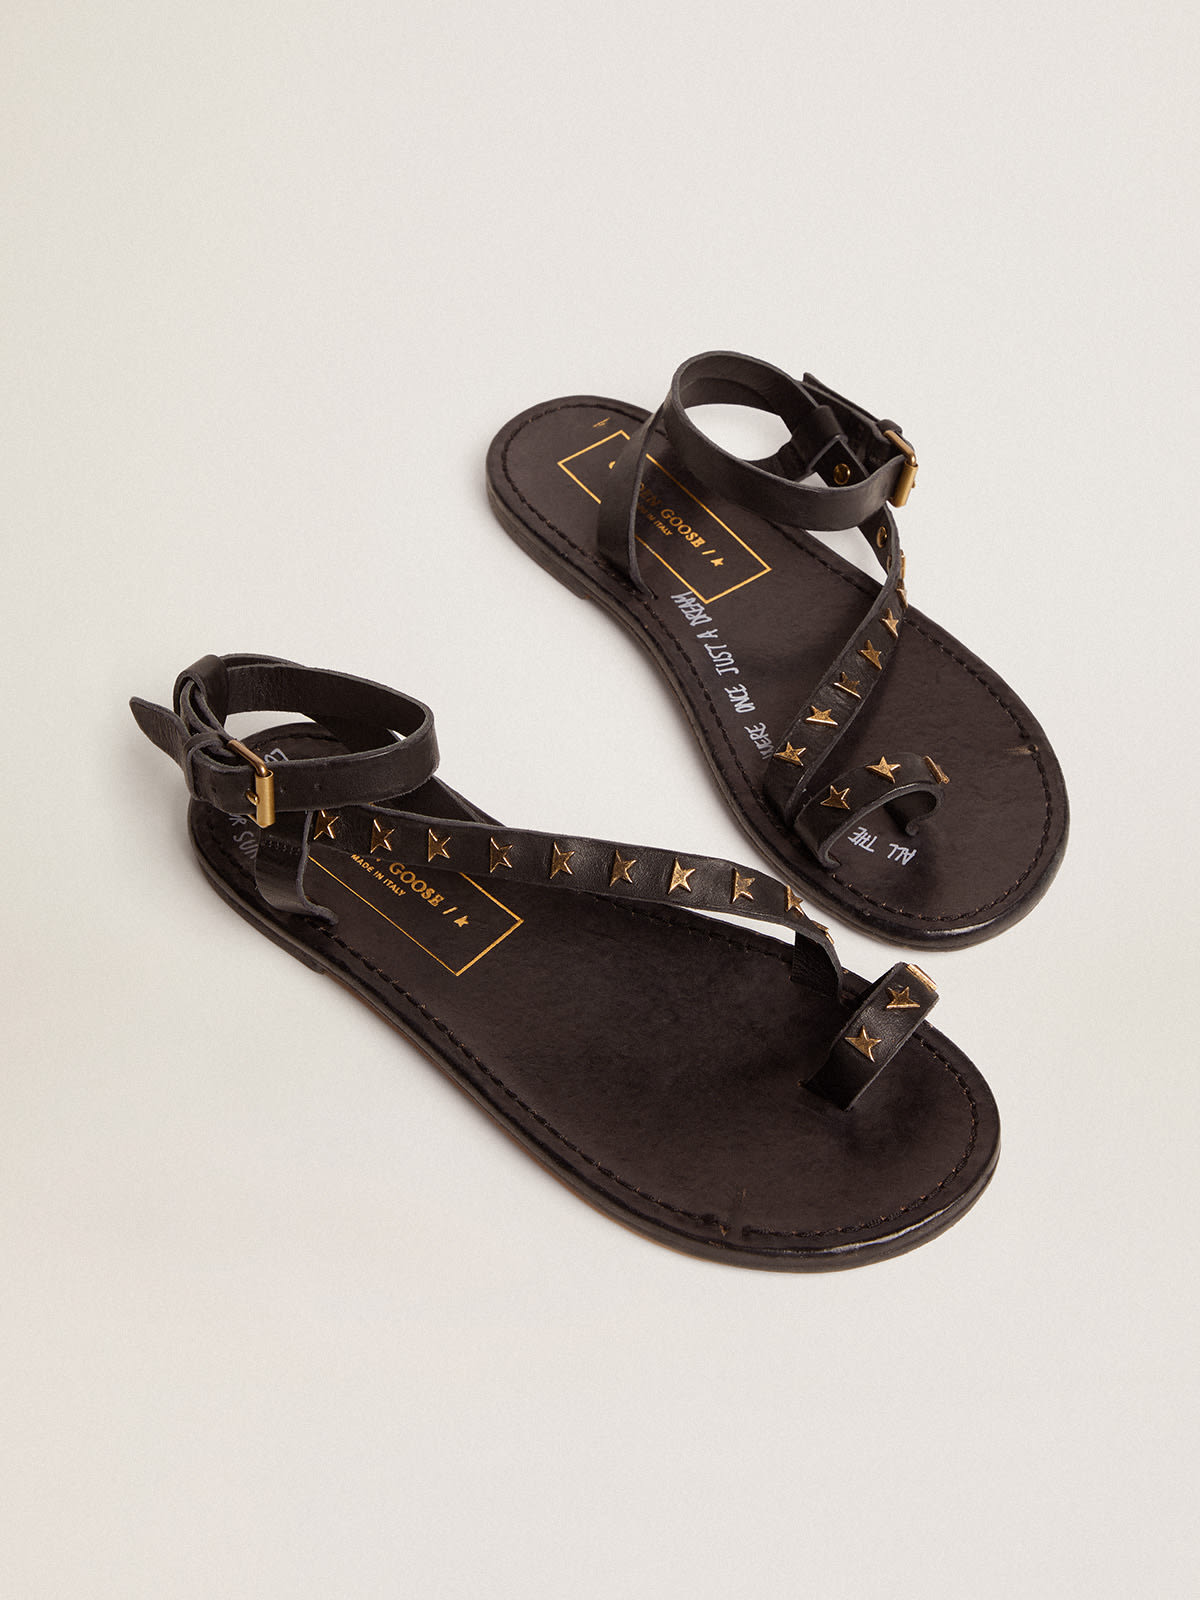 Golden Goose - Women's flat sandals in black leather with gold stars in 